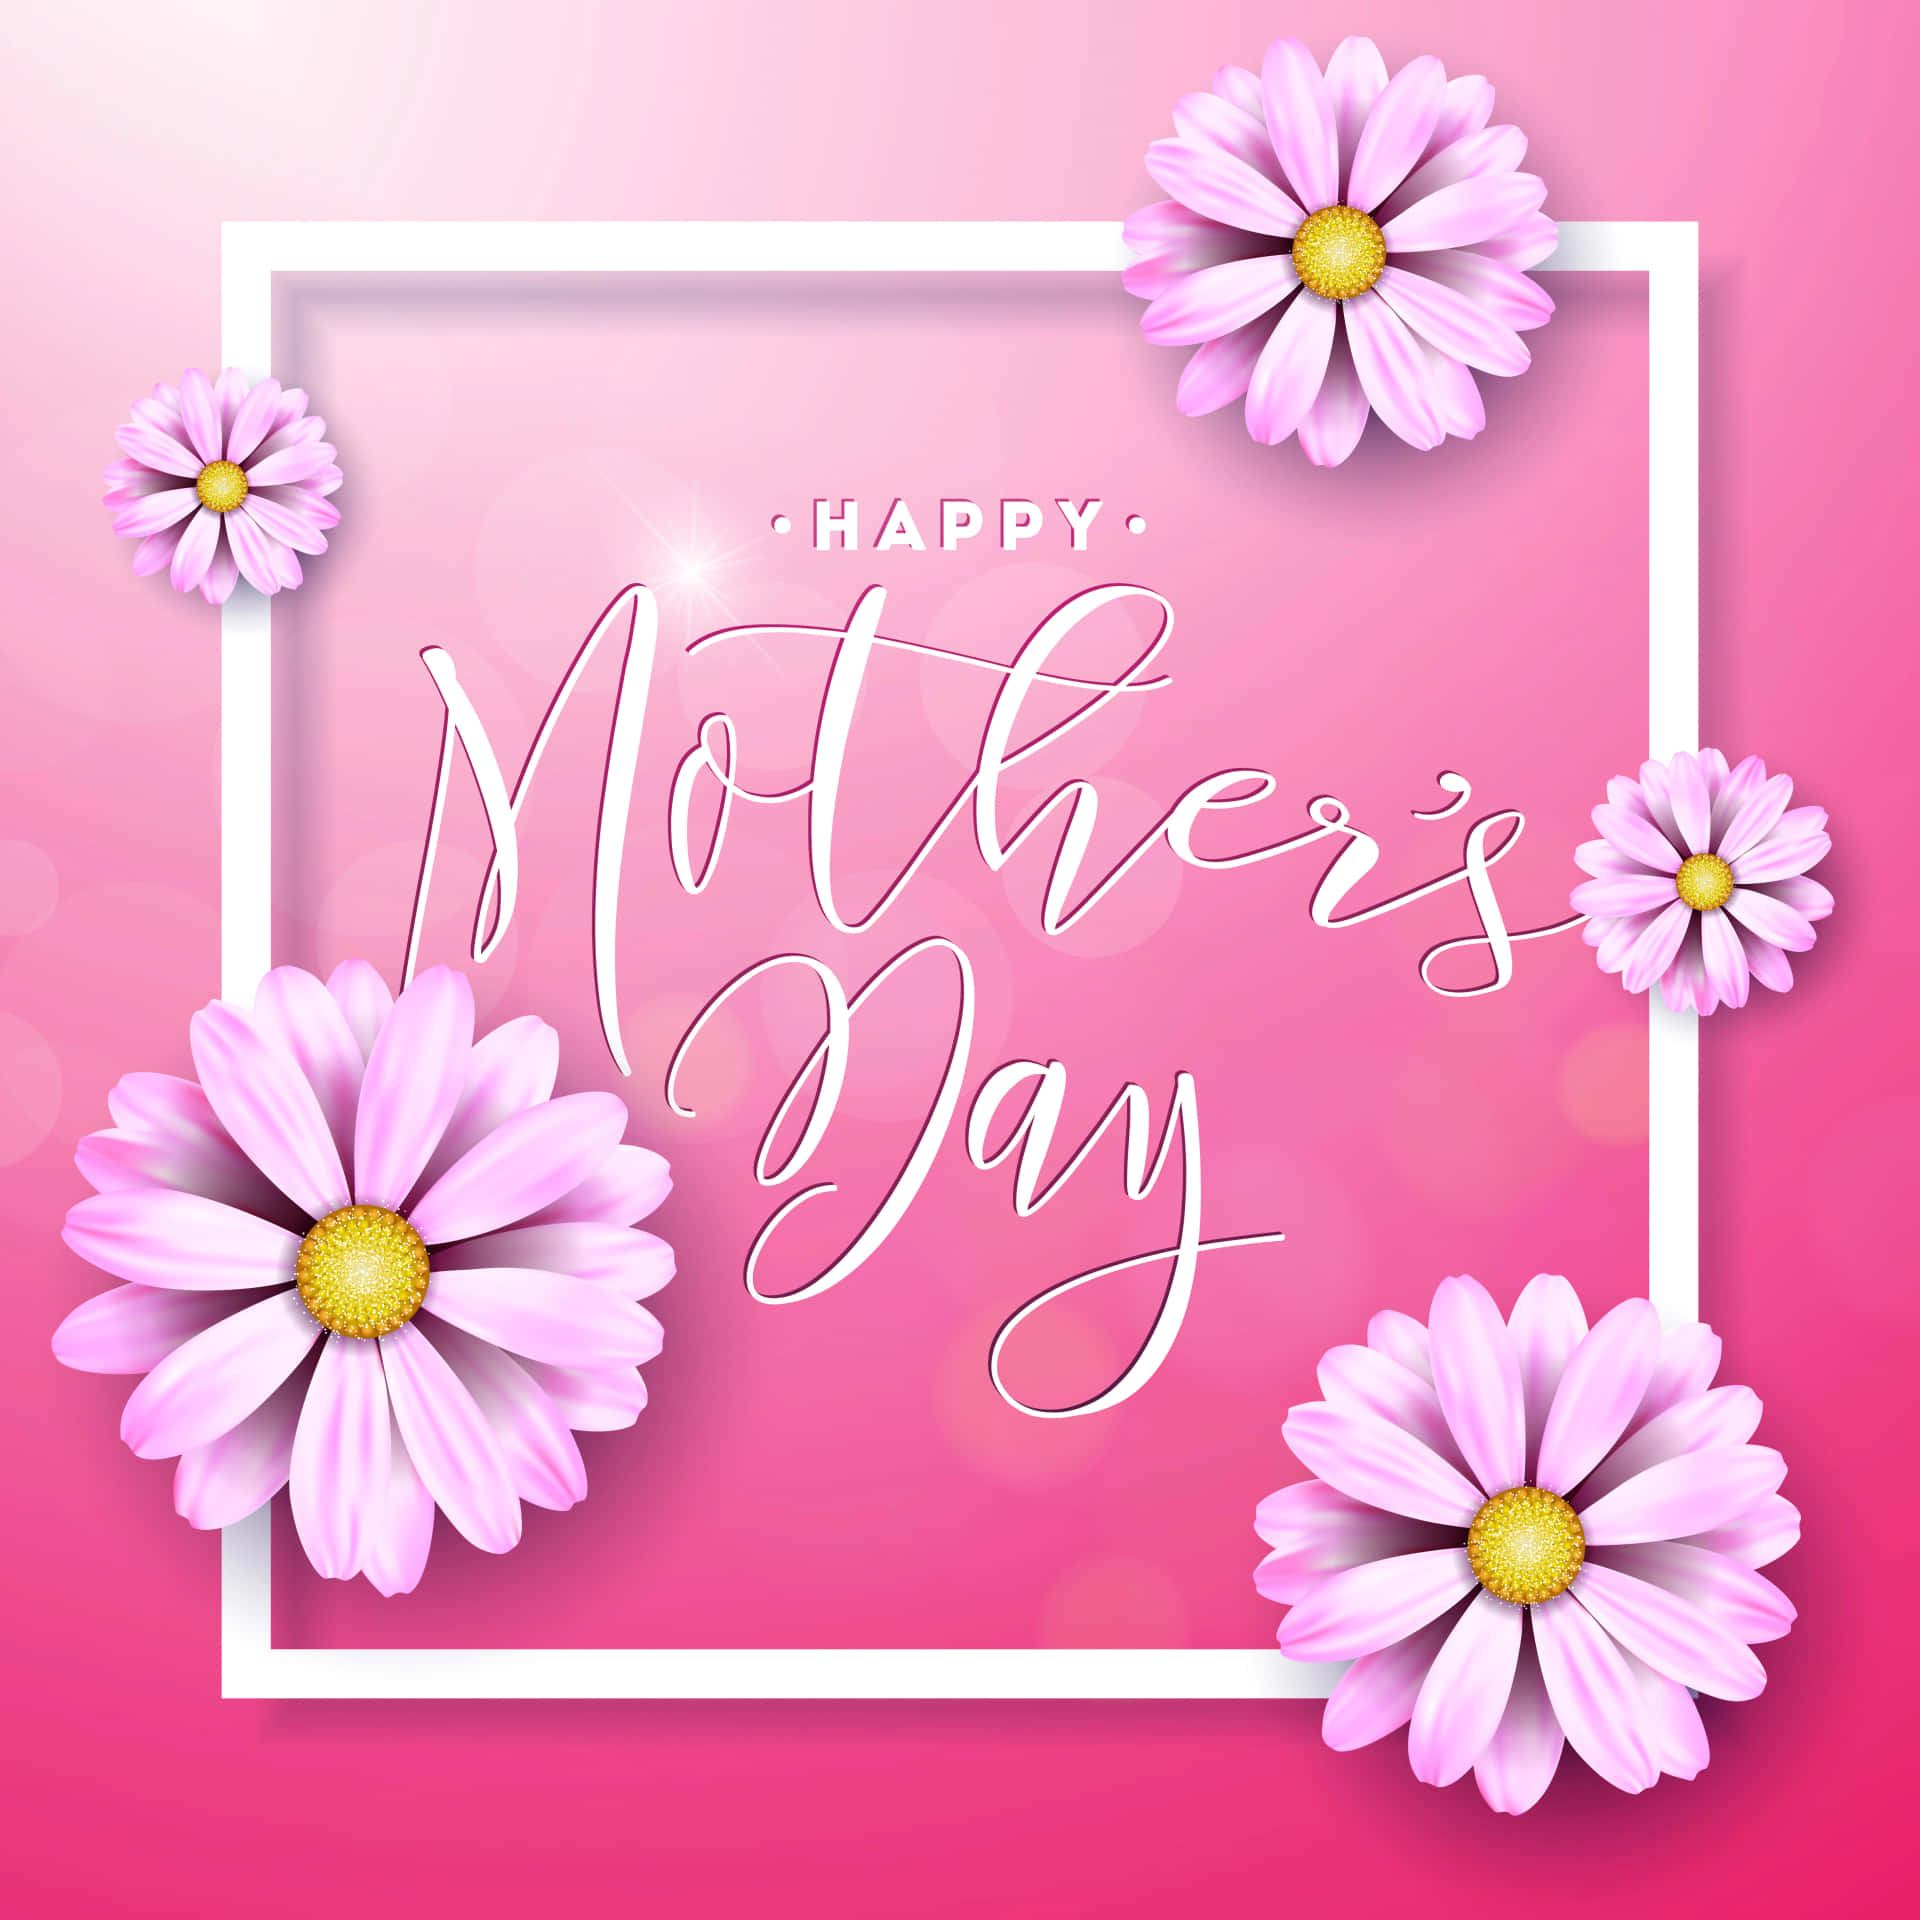 Happy Mother's Day With Pink Flowers And A Square Frame